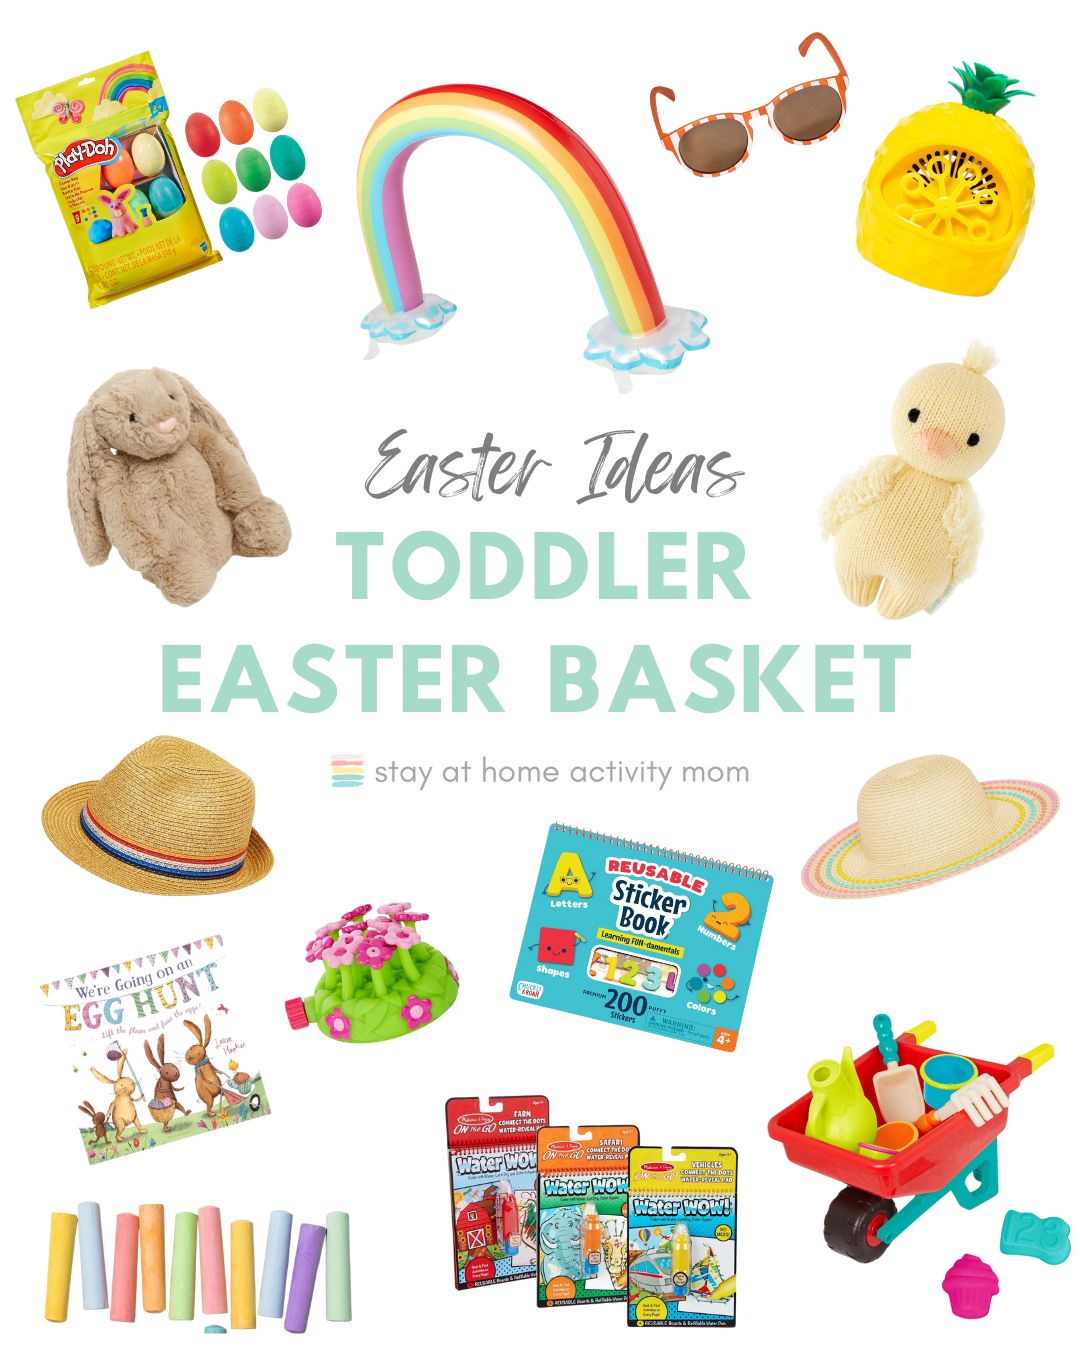 Easter Gifting Made Easy